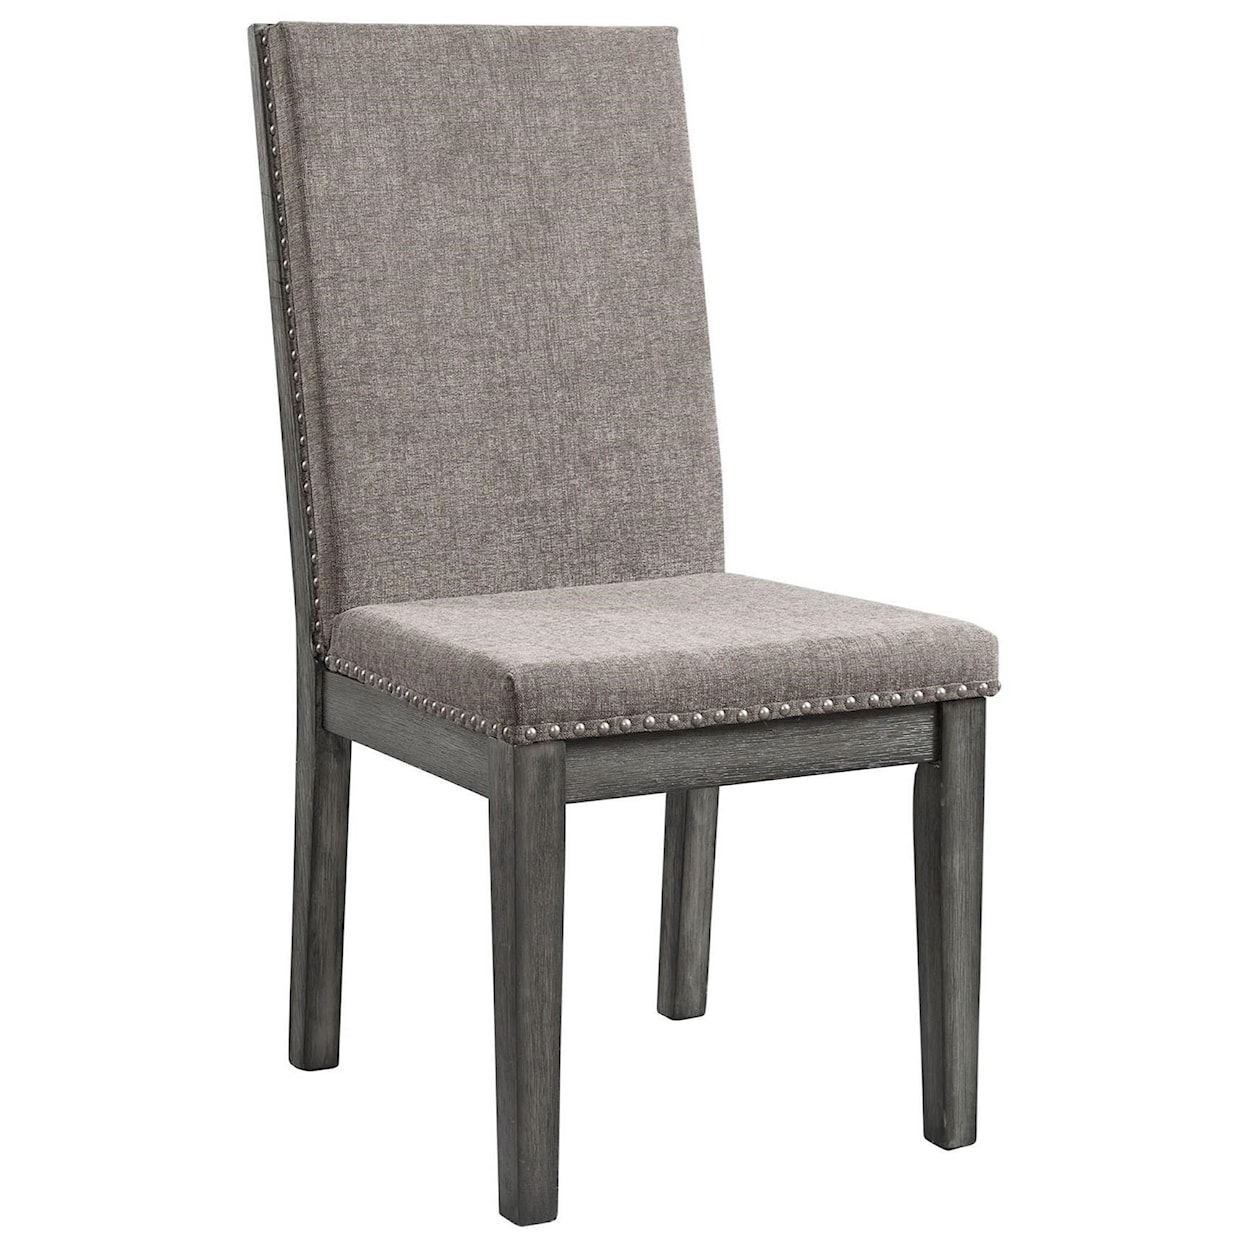 Elements International South Paw Dining Side Chair